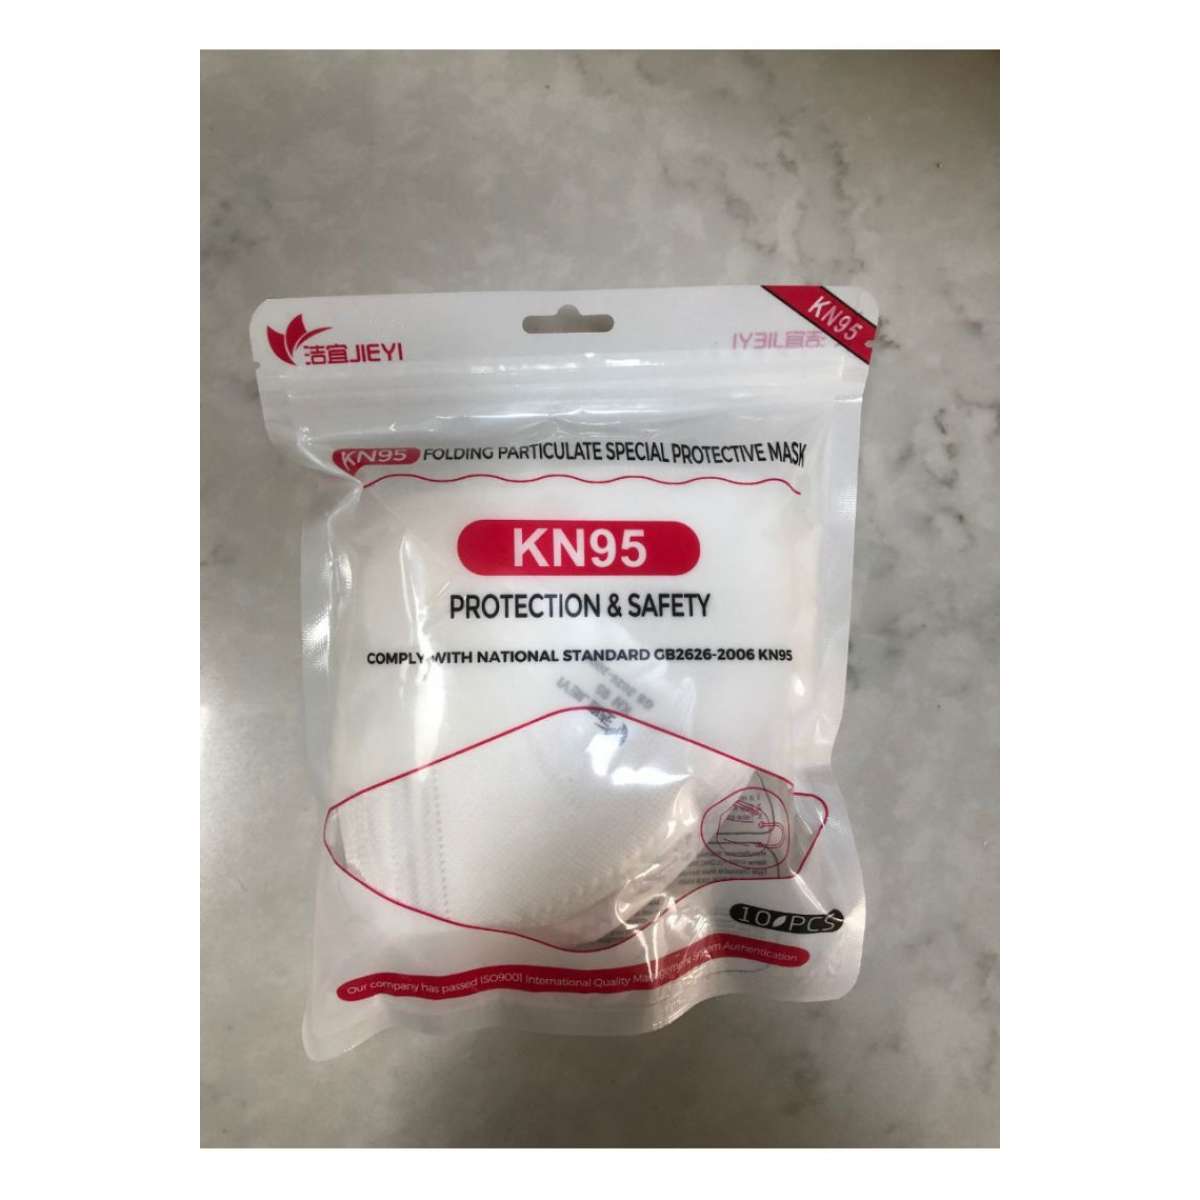 KN95 Respirator Mask - Pack of 10